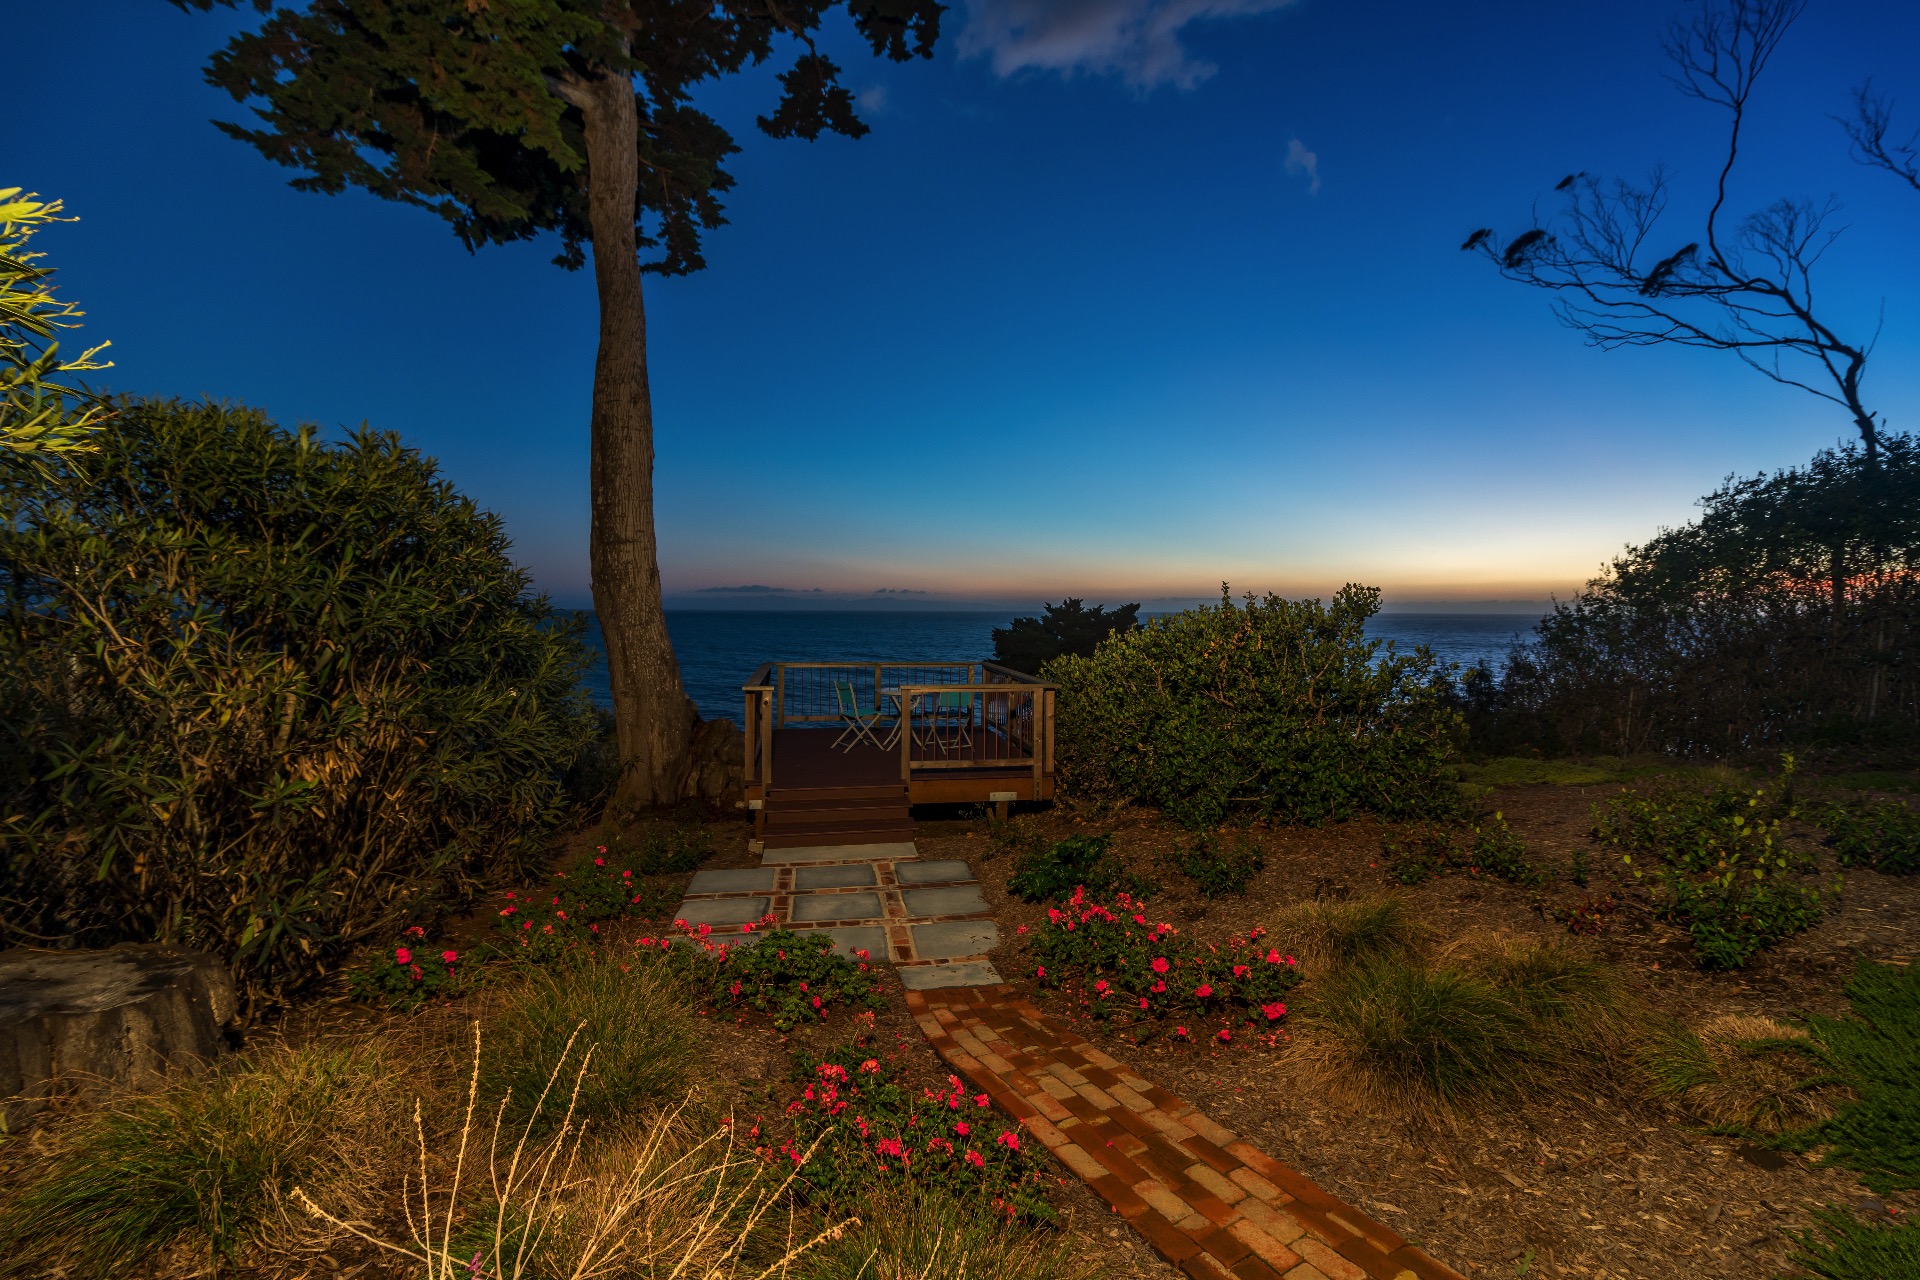 Nice deck at the edge of the bluff with views of the ocean and channel islands.